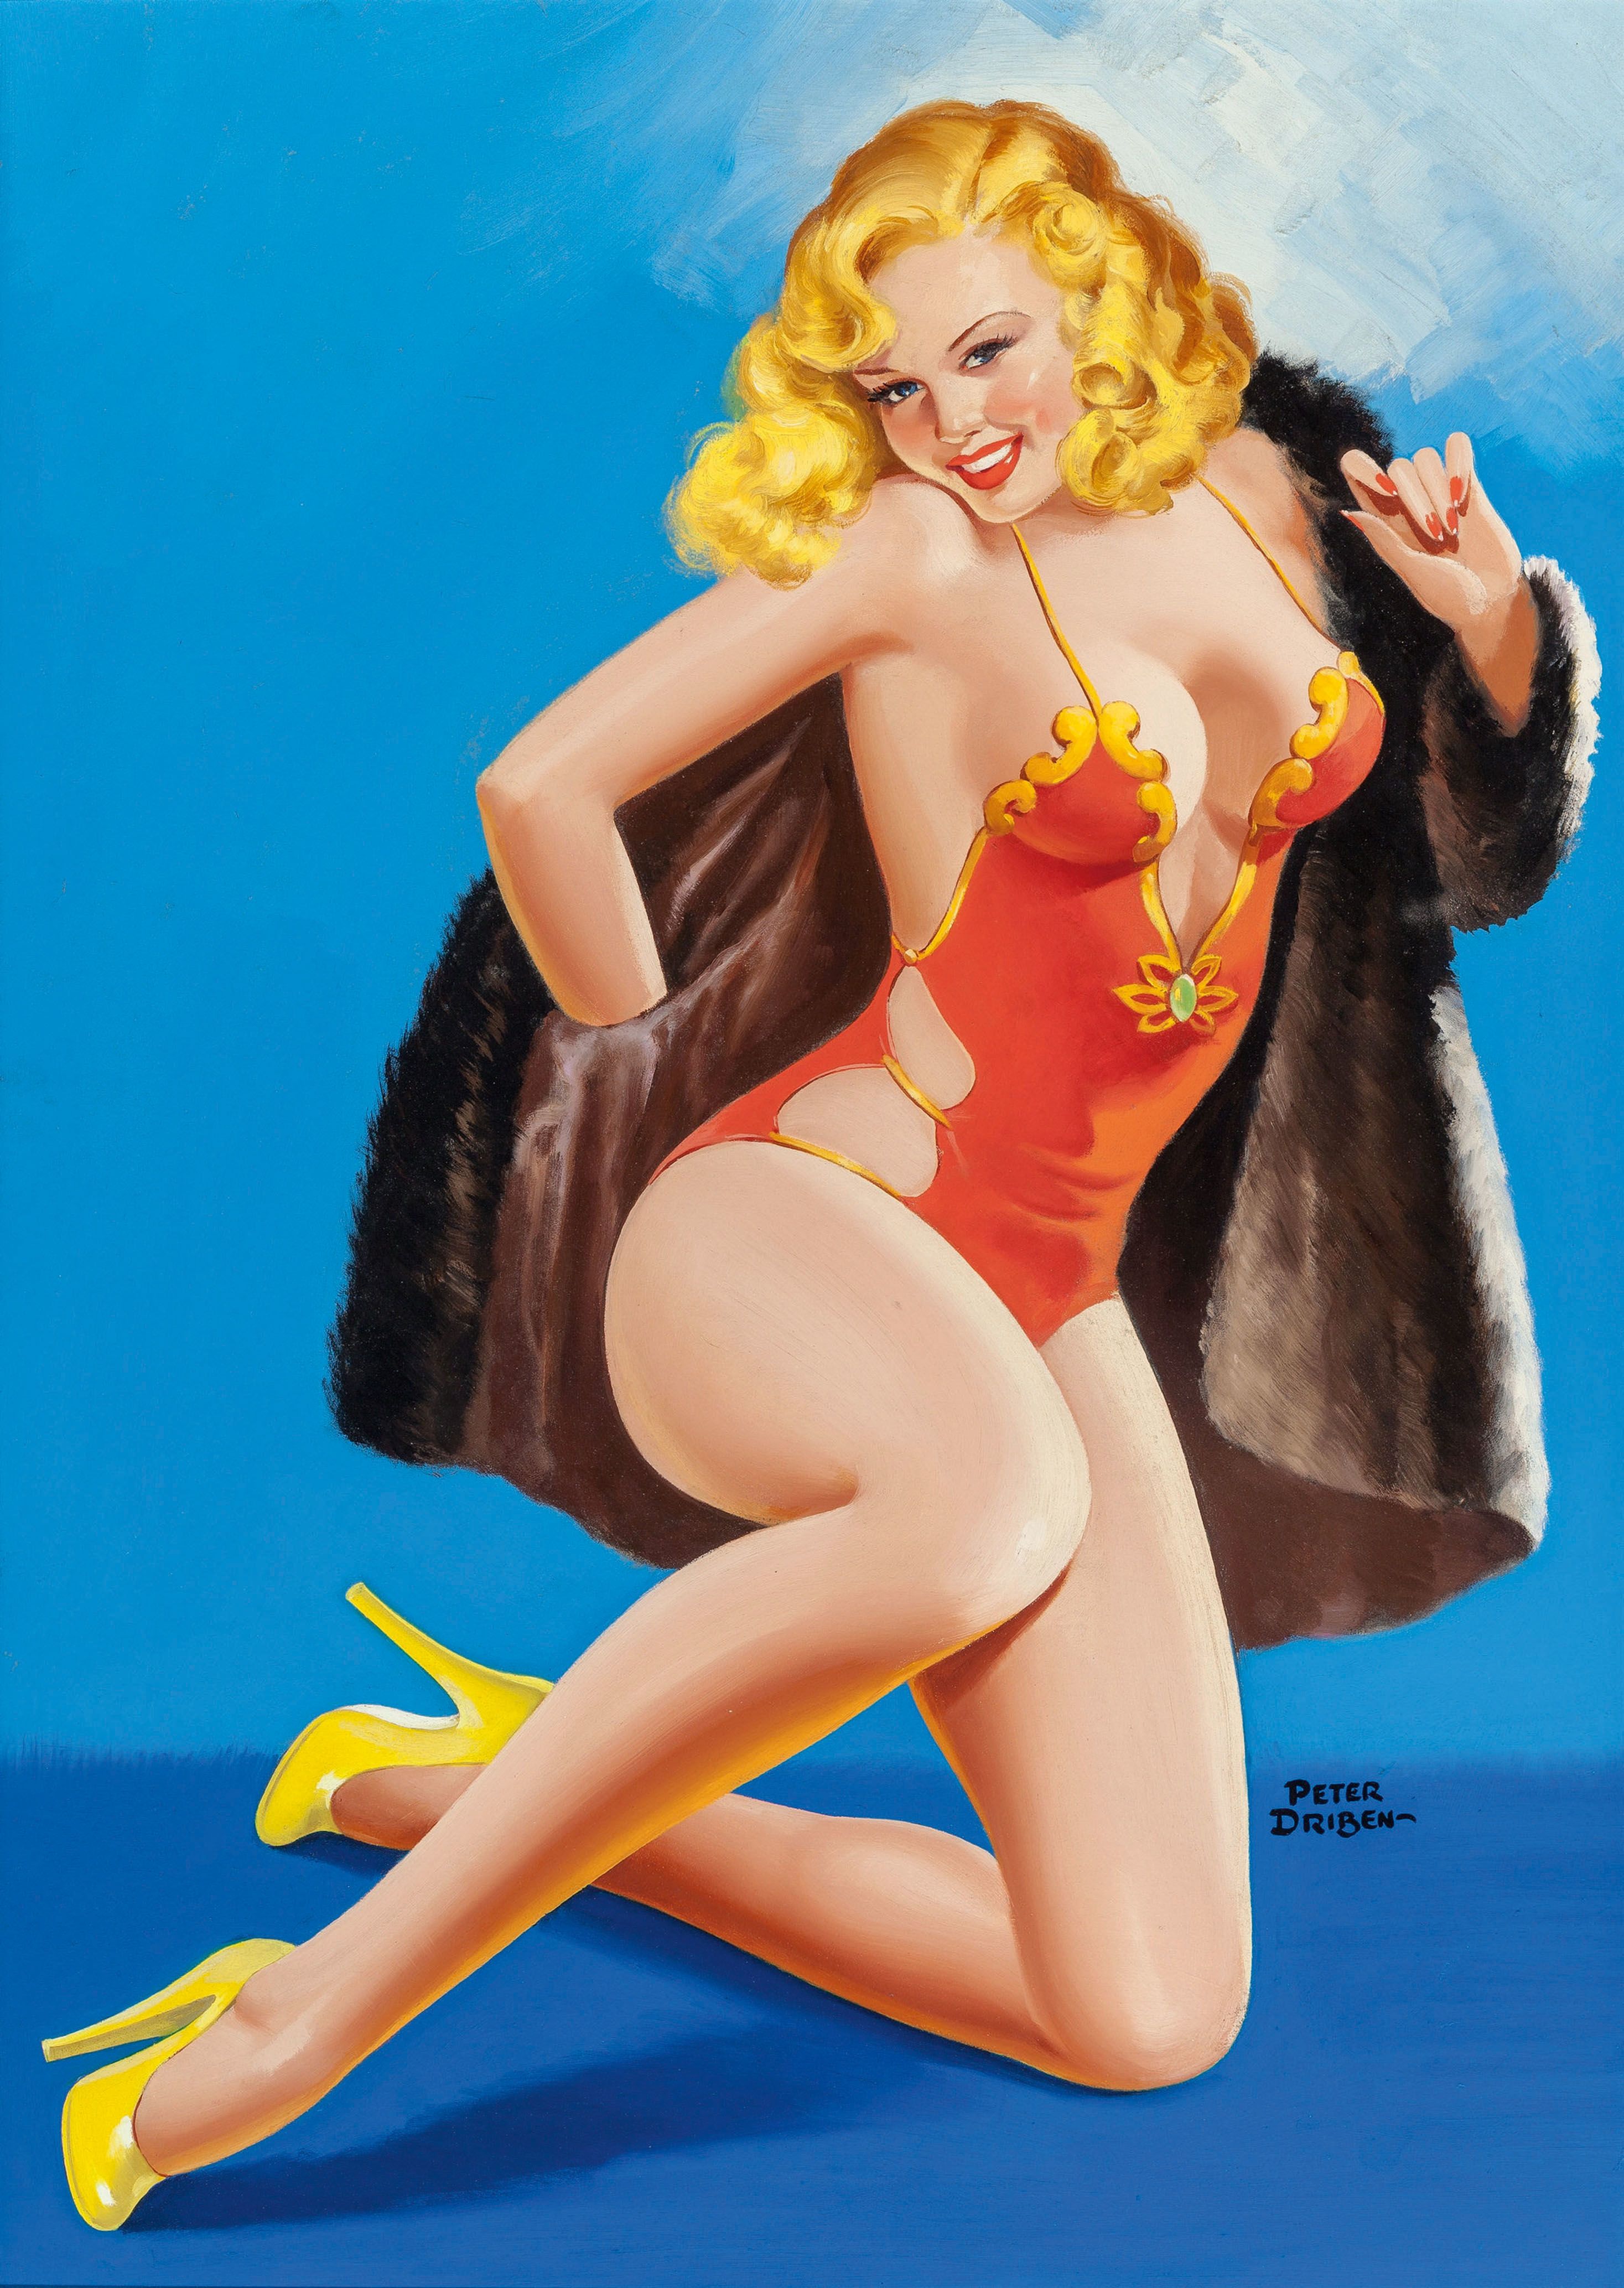 Modern Pin Up Girls Porn - The lost art of the American pin-up | CNN